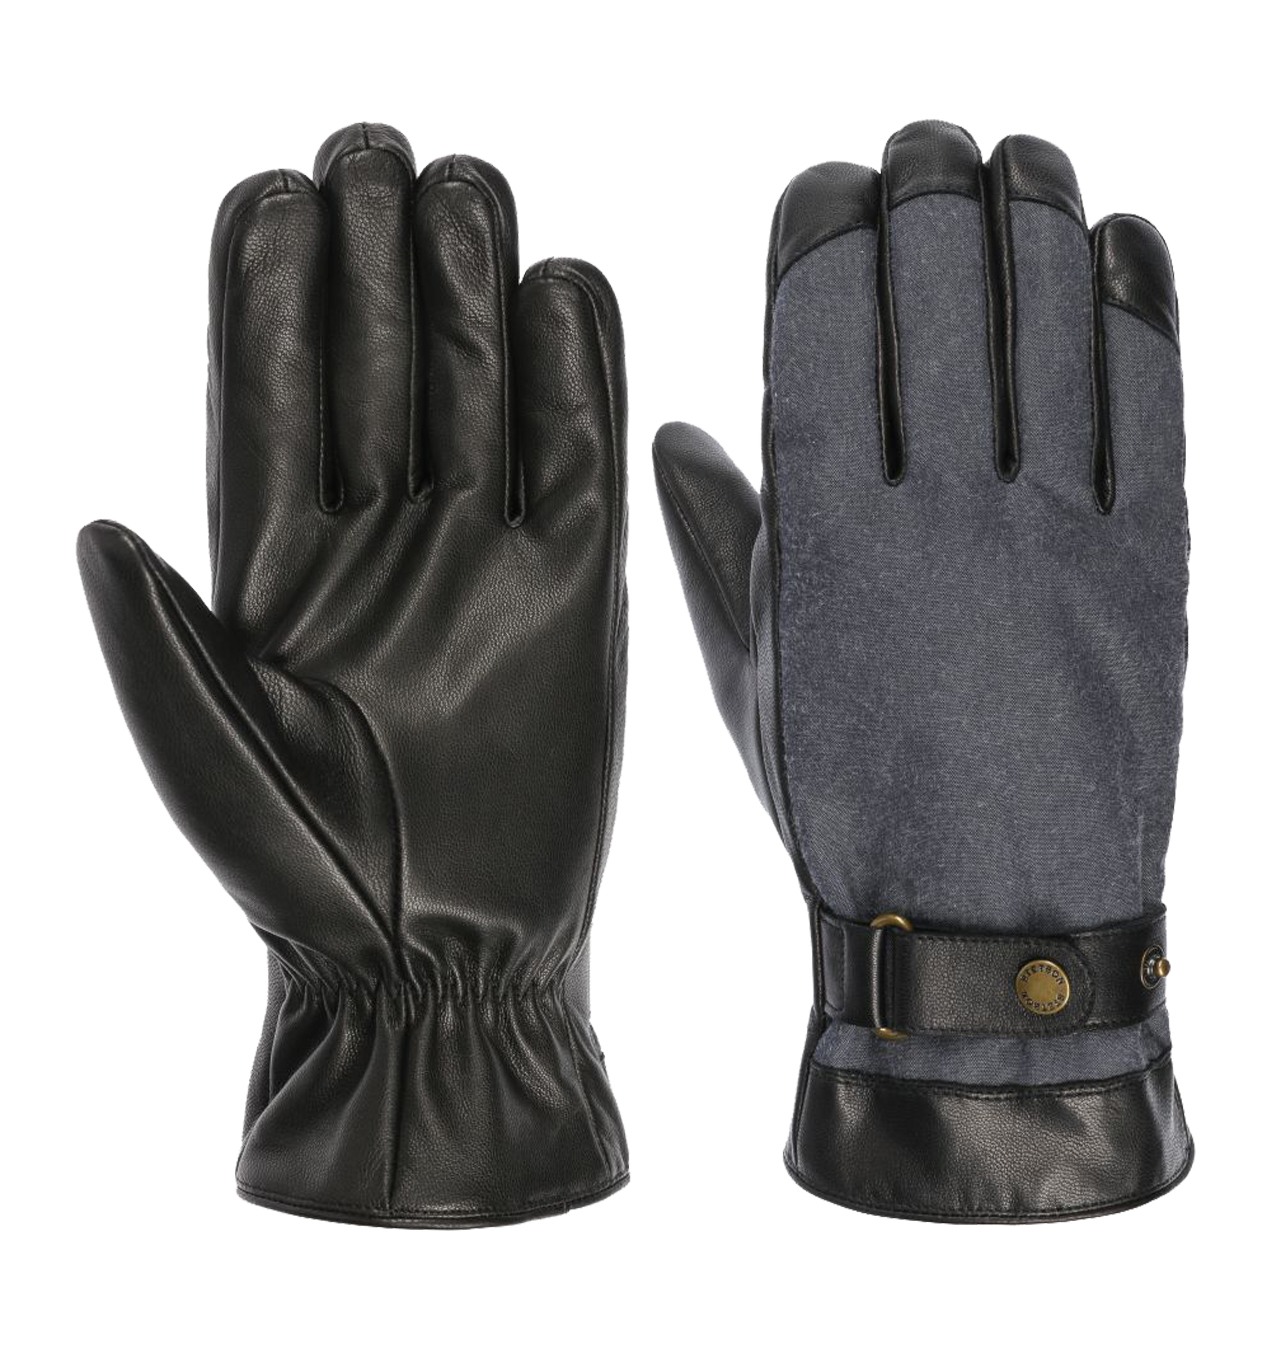 Stetson - Nappa Leather Waxed Cotton Gloves - Grey